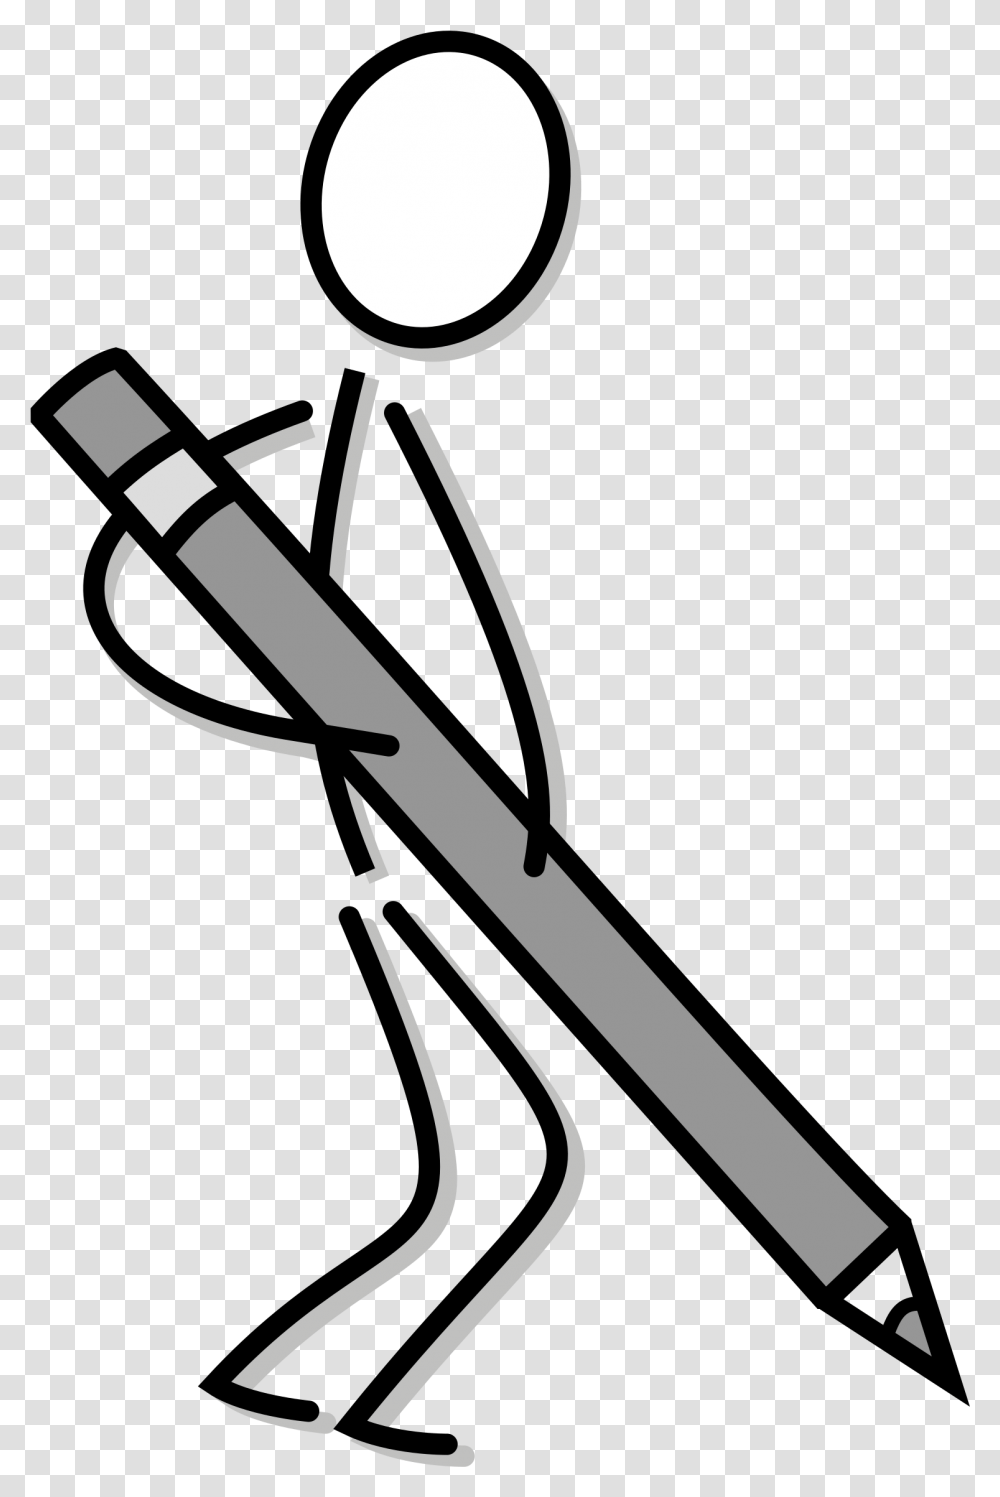 Stick Figure Drawing Line Art Writing Writing Stick Figure Clipart, Sword, Blade, Weapon, Weaponry Transparent Png